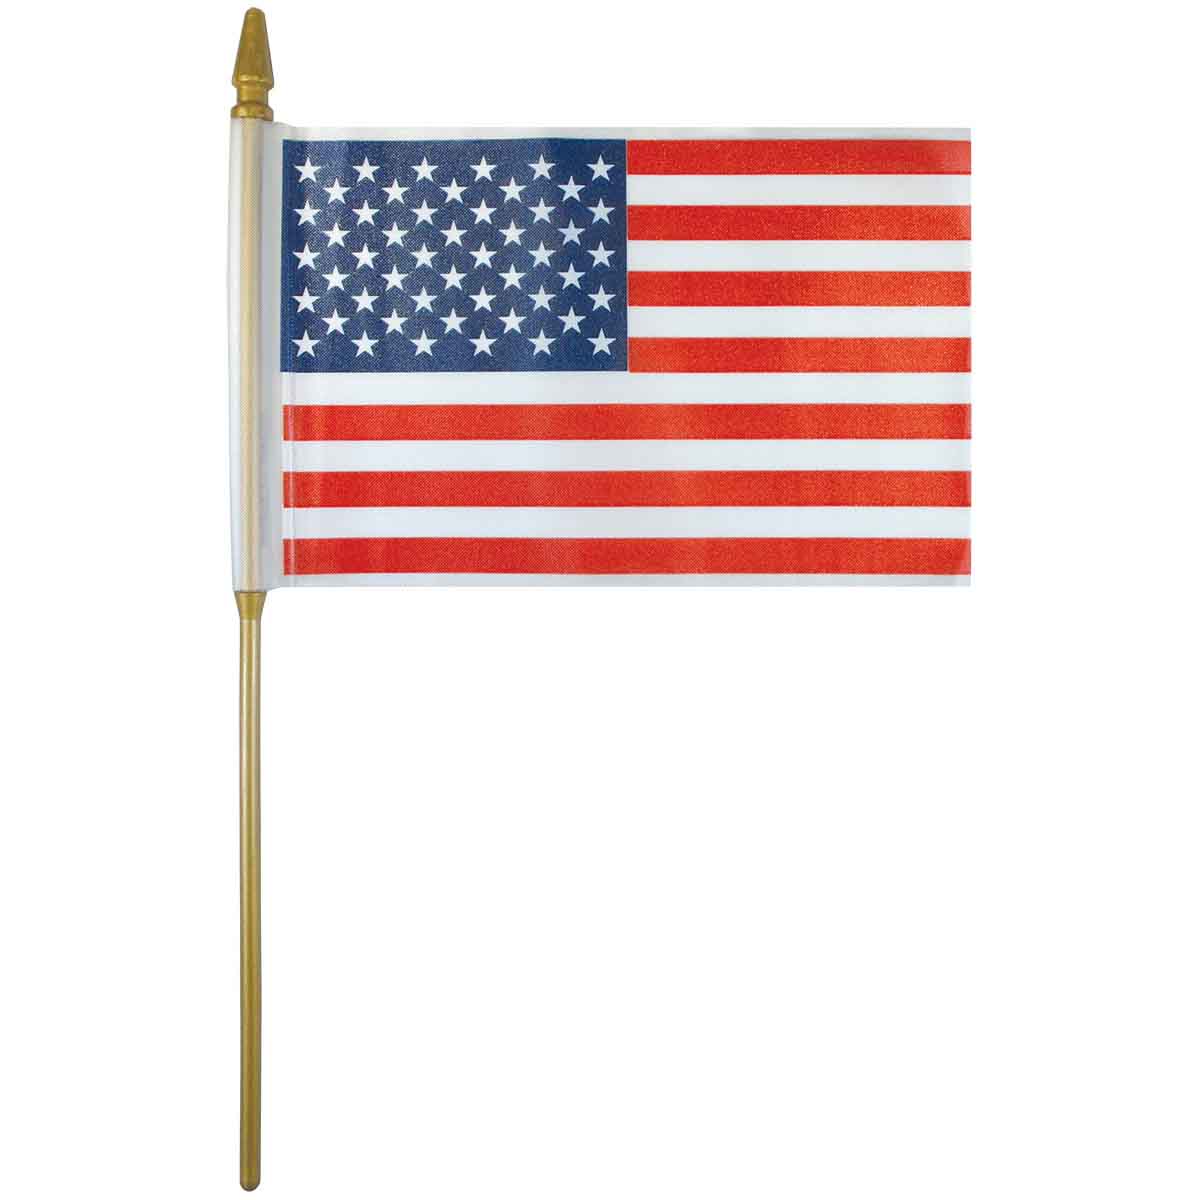 Plastic US Mounted Flags